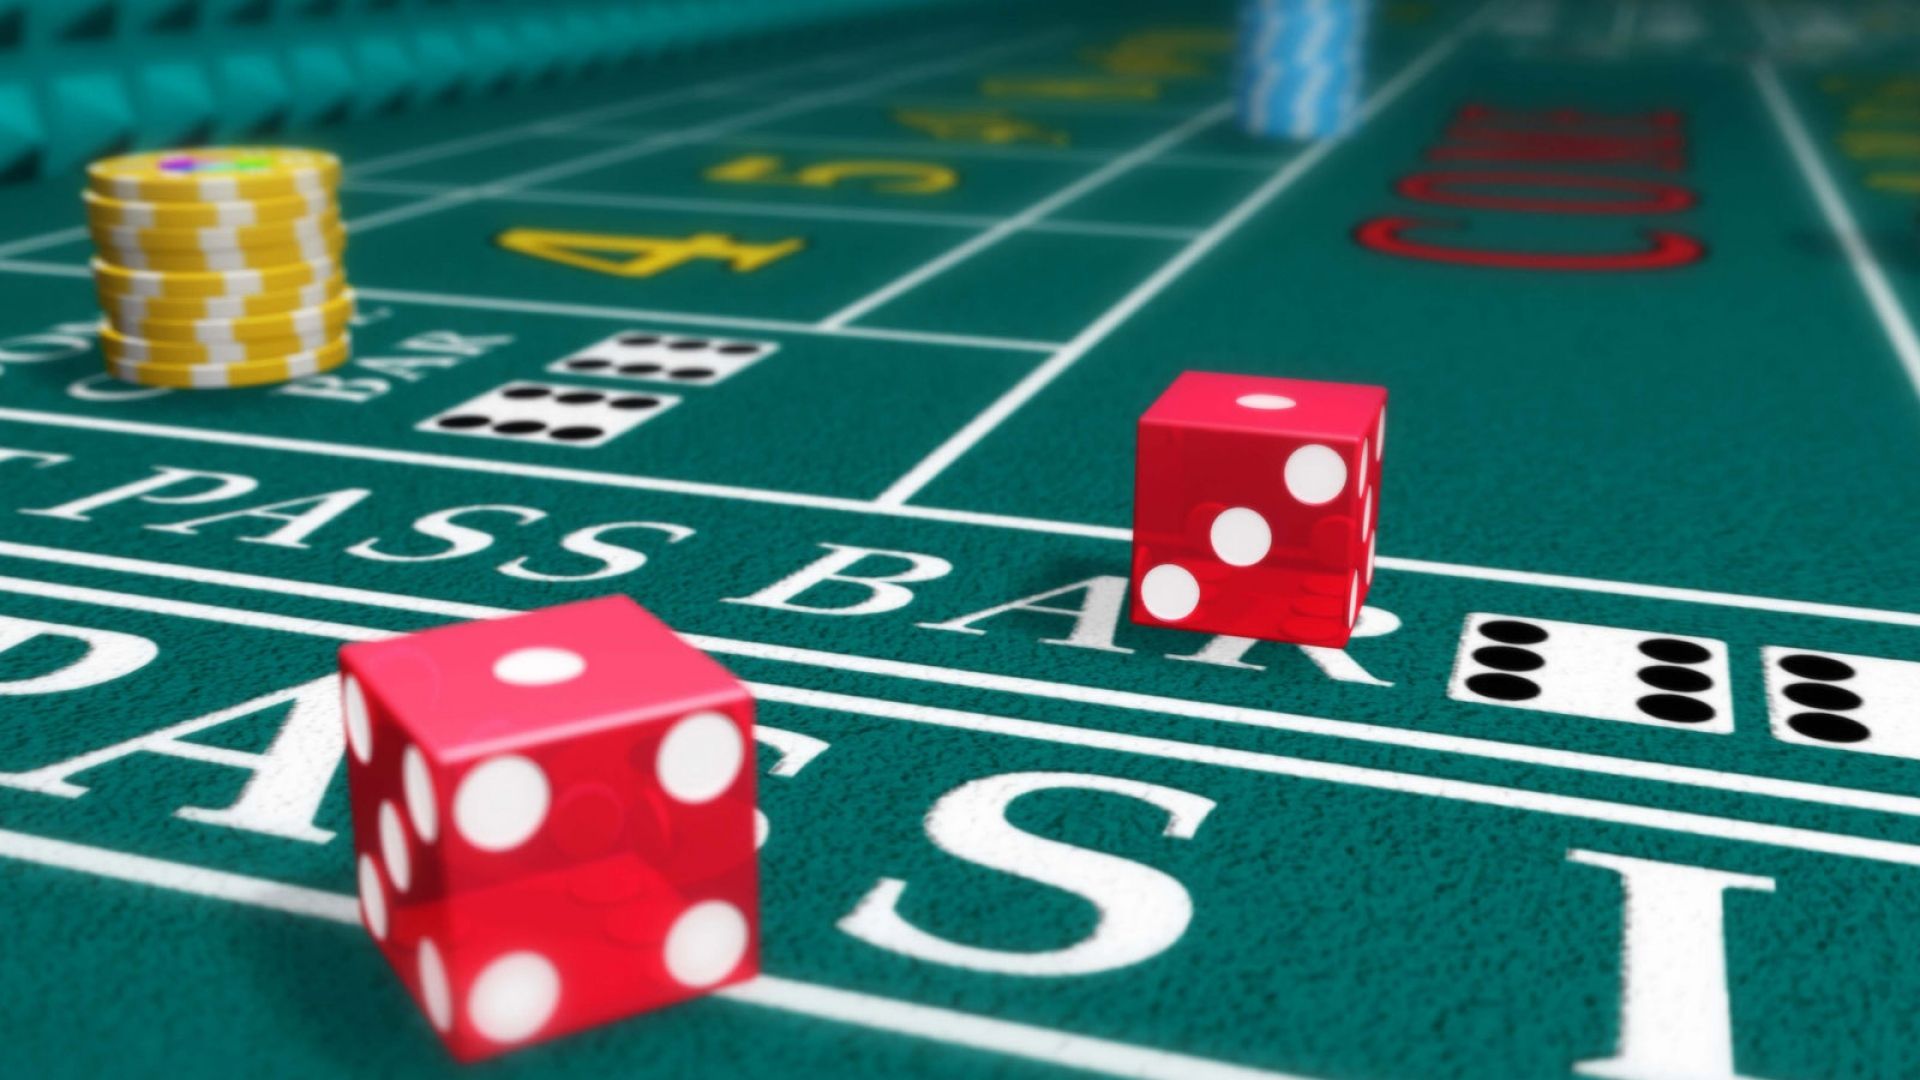 Great Deals Of Your Online Casino From Devastation By Social Media Site?